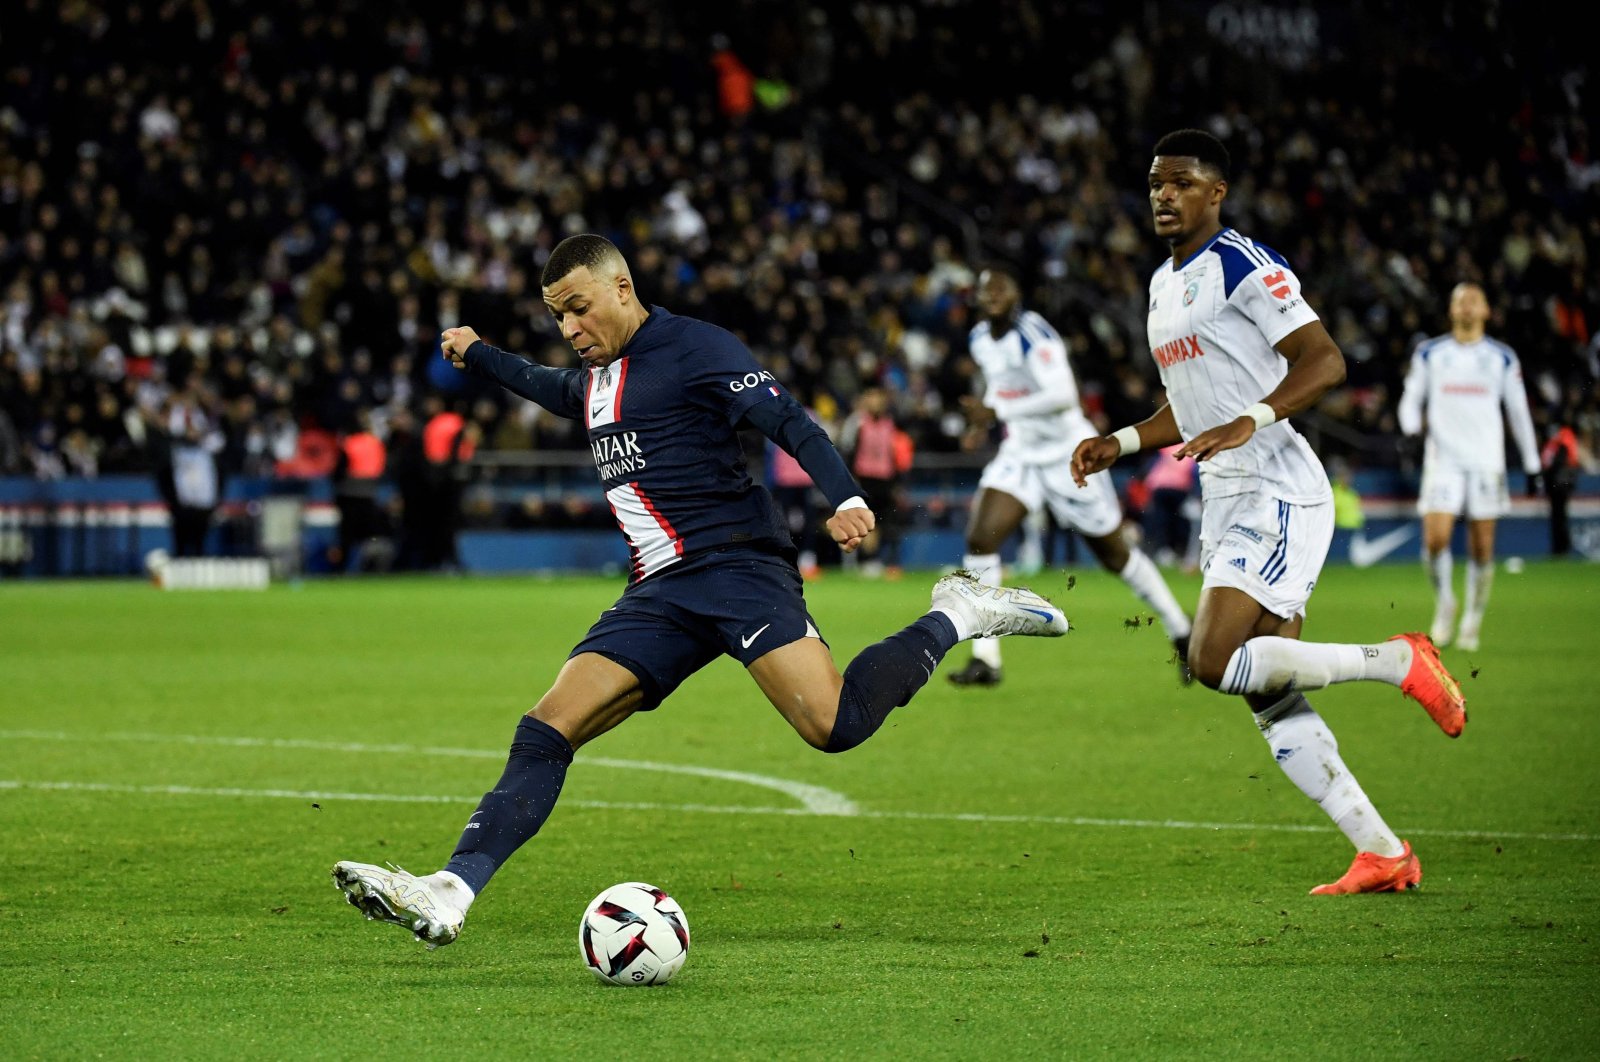 PSG&#039;s French forward Kylian Mbappe shoots the ball during the French L1 football match between Paris Saint-Germain FC and RC Strasbourg Alsace at the Parc des Princes stadium, Paris, France, Dec. 28, 2022. (AFP Photo)